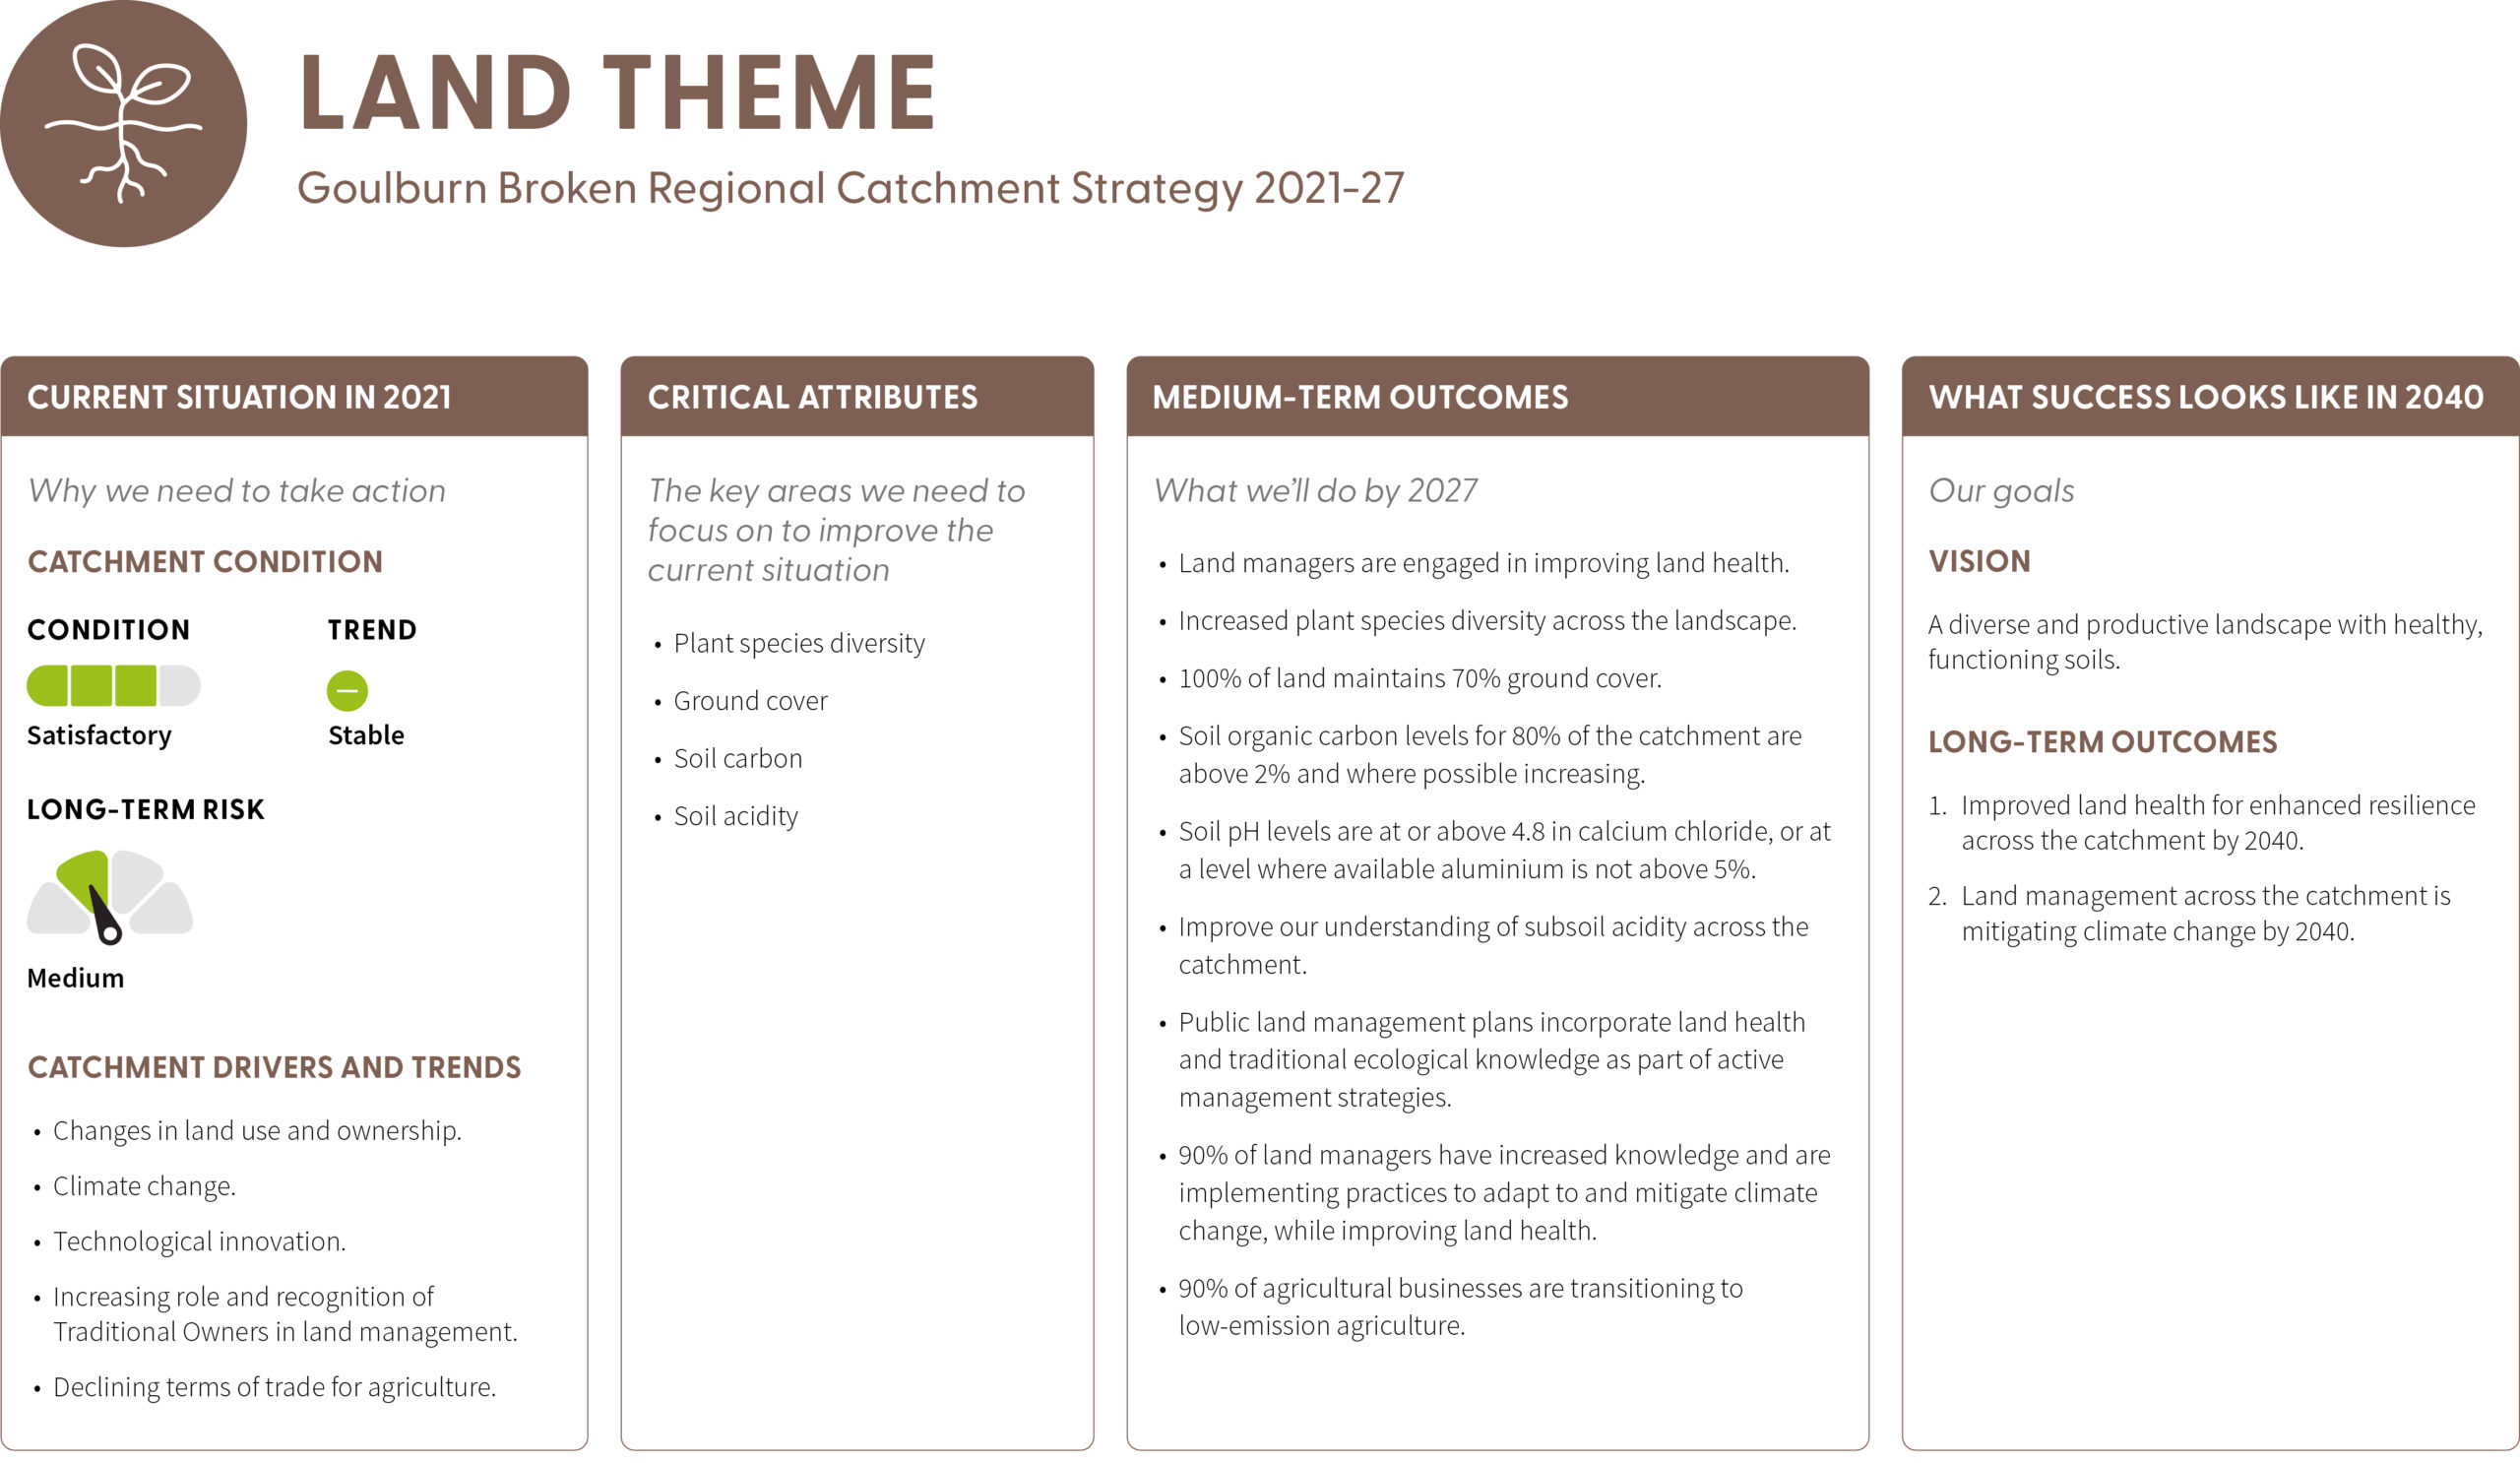 A diagram summarising the land theme content of the strategy, with four main sections: current situation in 2021, critical attributes, medium-term outcomes and what success looks like in 2040. The content of the diagram is described in the information below the diagram.